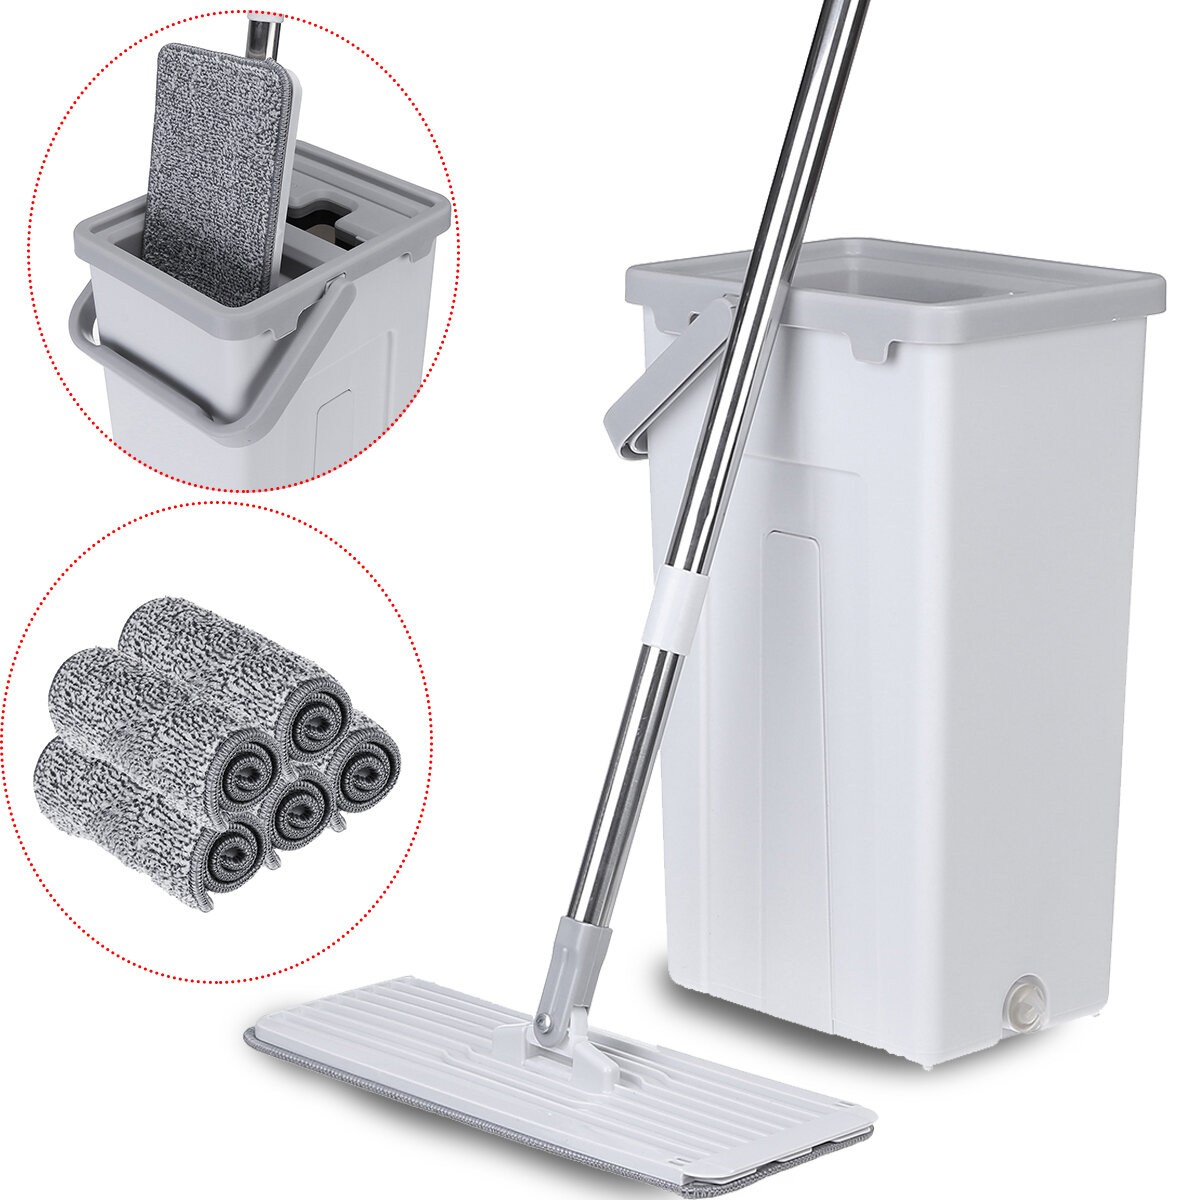 

Flat Squeeze Mop Bucket Free Washing Self Cleaning Microfiber Pads Cleaner Home Cleaning Tools Set